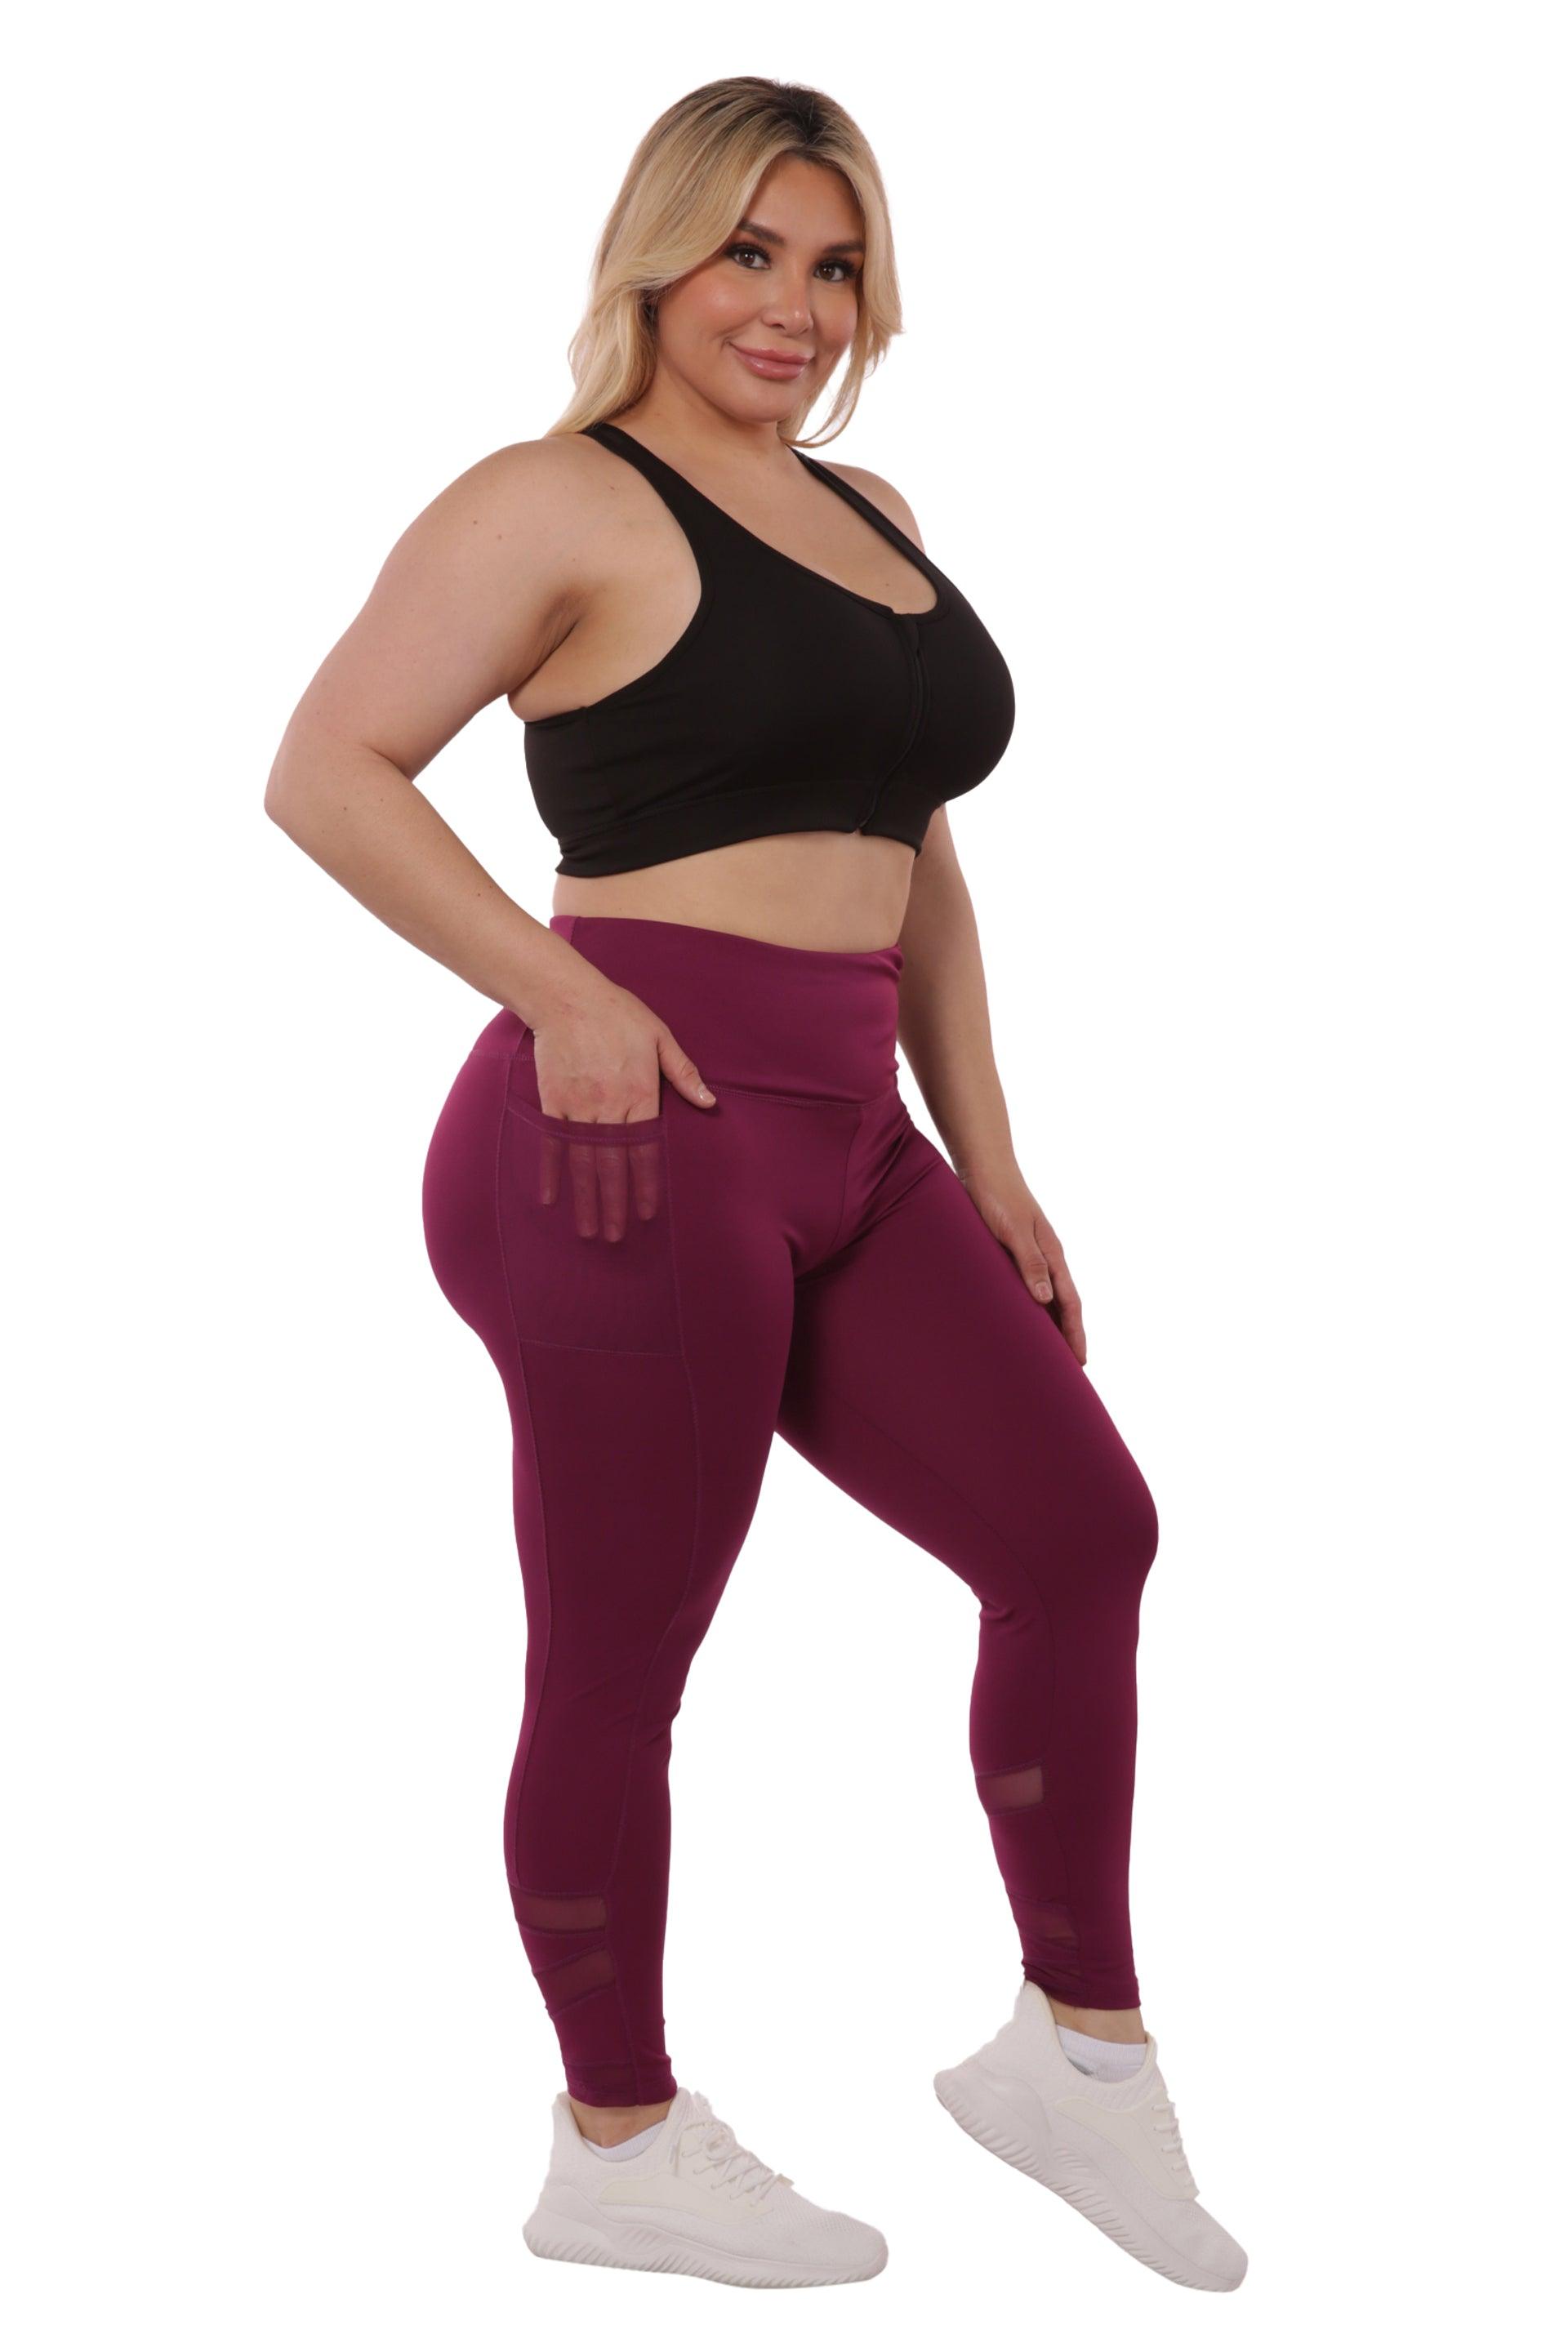 Plus Size Yoga Running Leggings With Pockets With Tummy Control